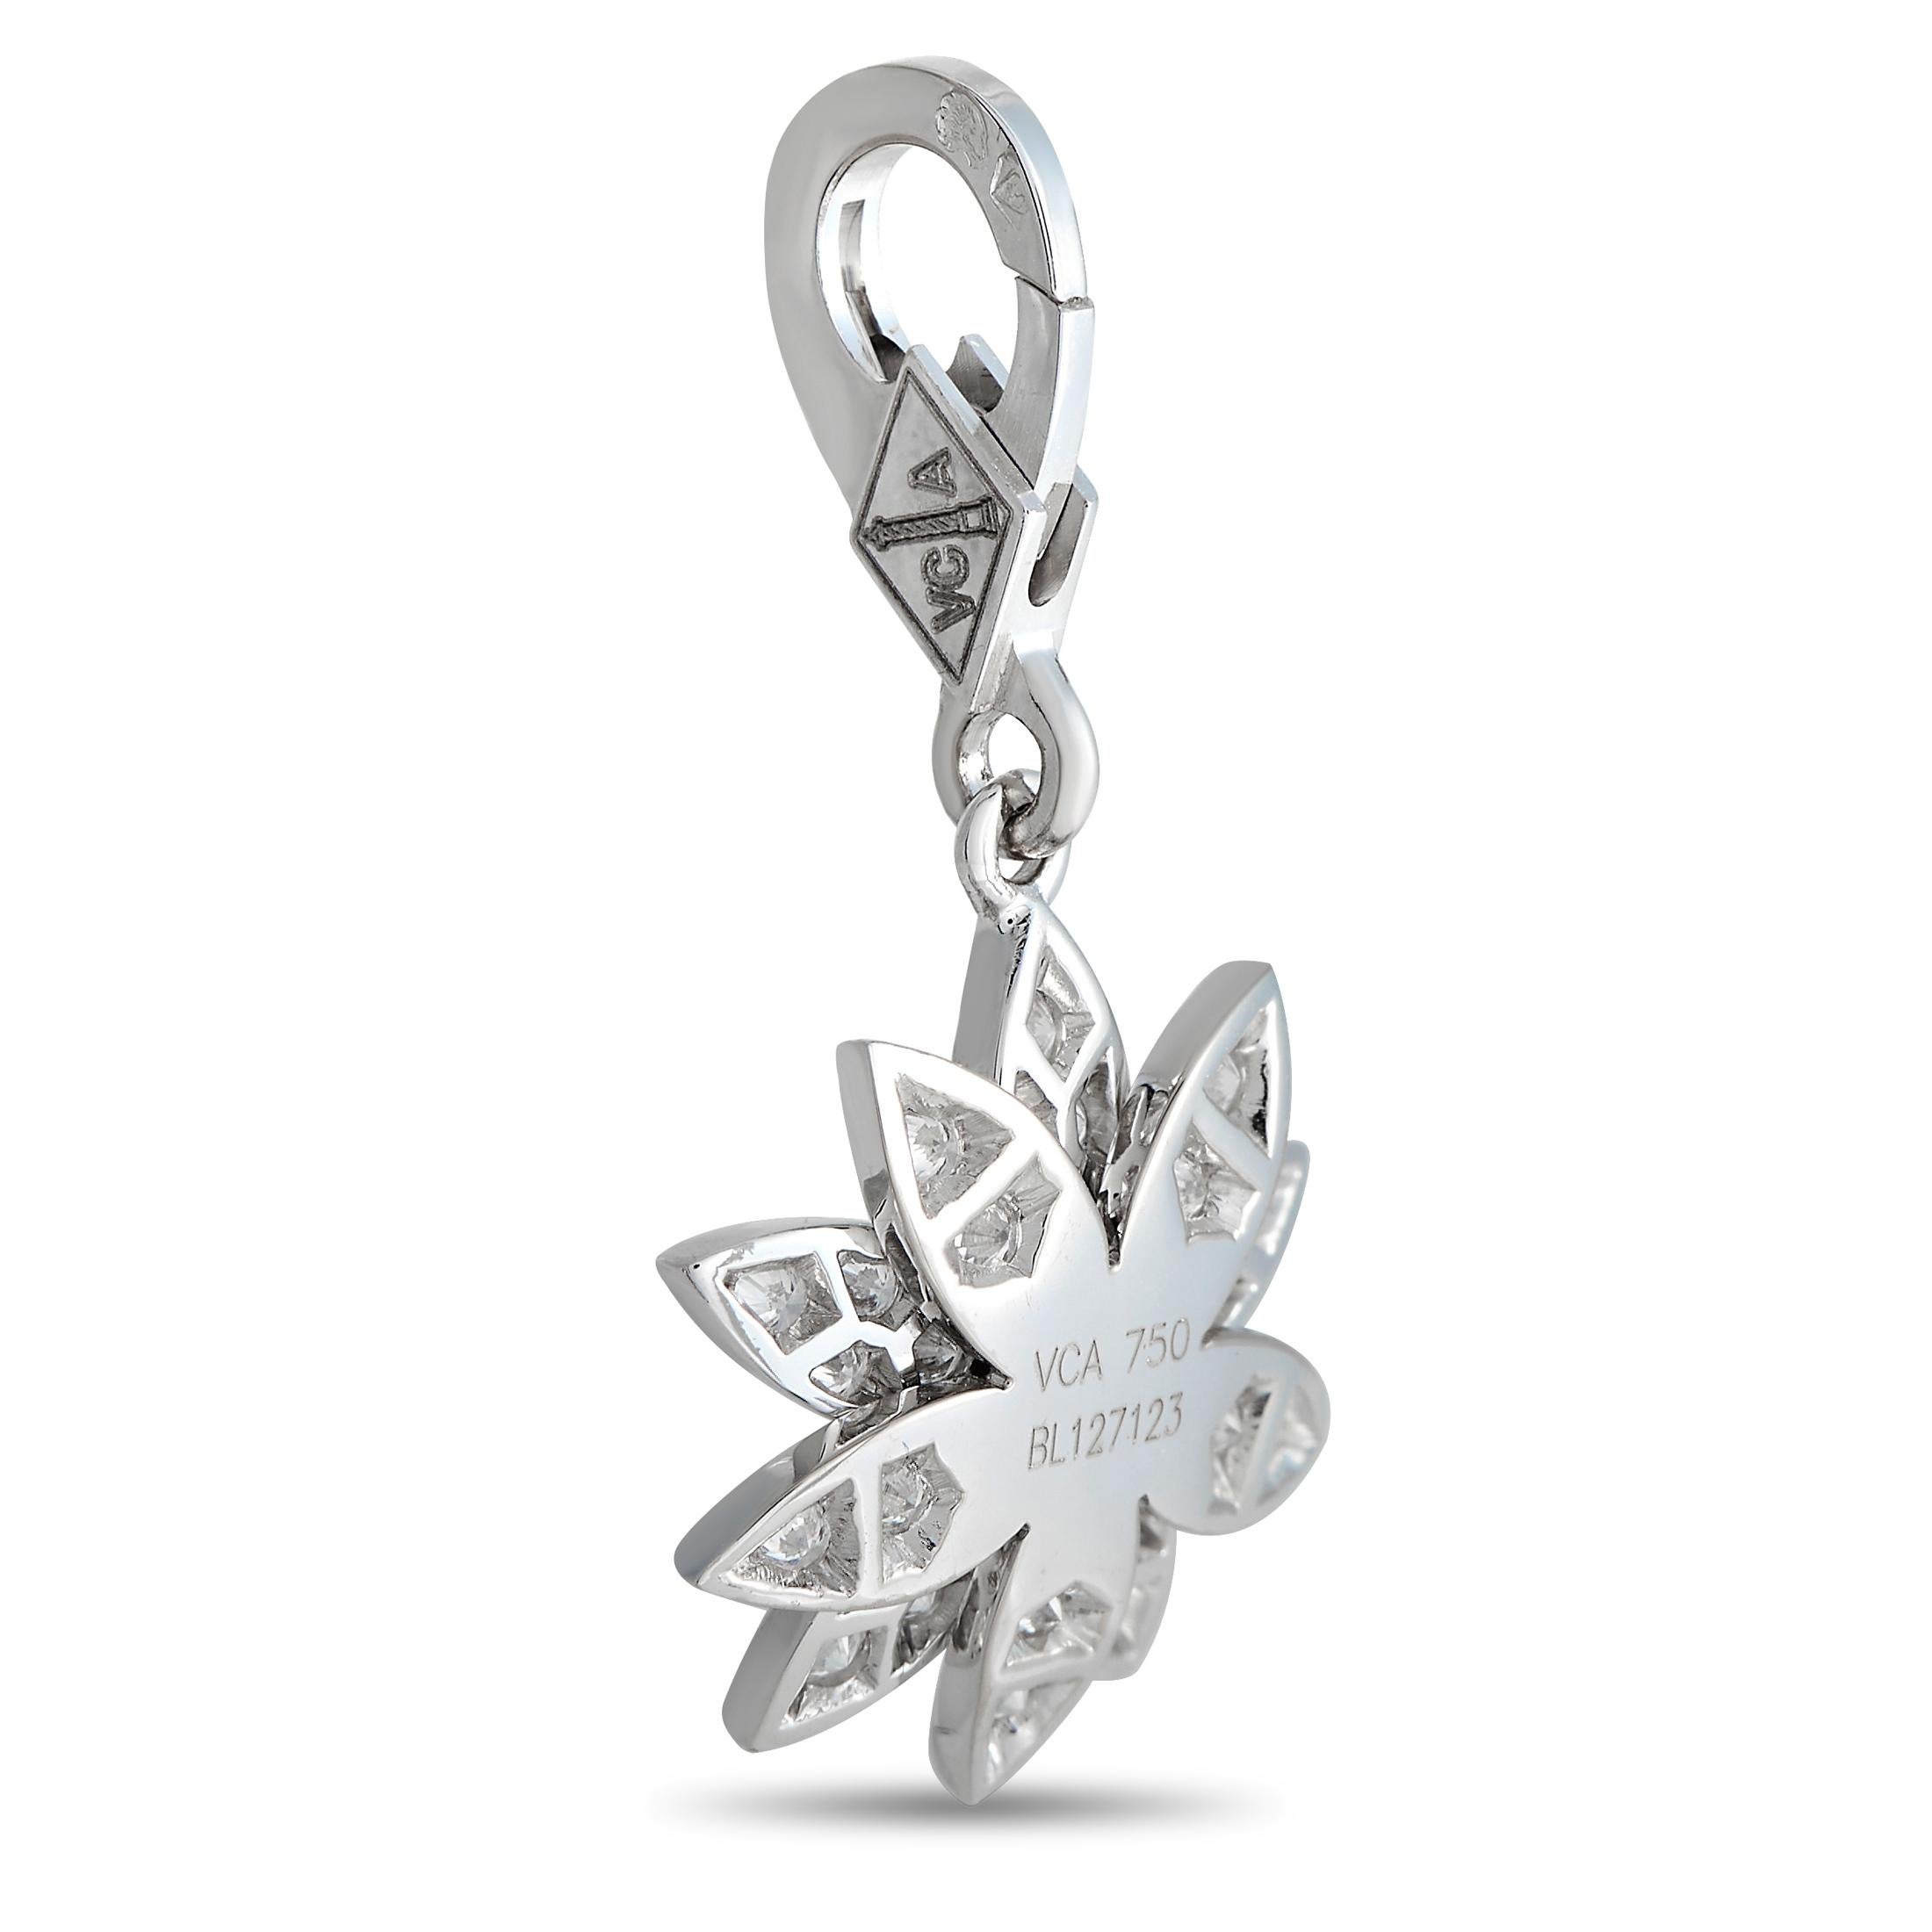 Be reminded of your beauty and inner strength by carrying this sparkling charm from Van Cleef & Arpels' Lotus Collection. It features a sculpted lotus in white gold with petals covered with brilliant diamonds. The lotus charm has a VCA-stamped and